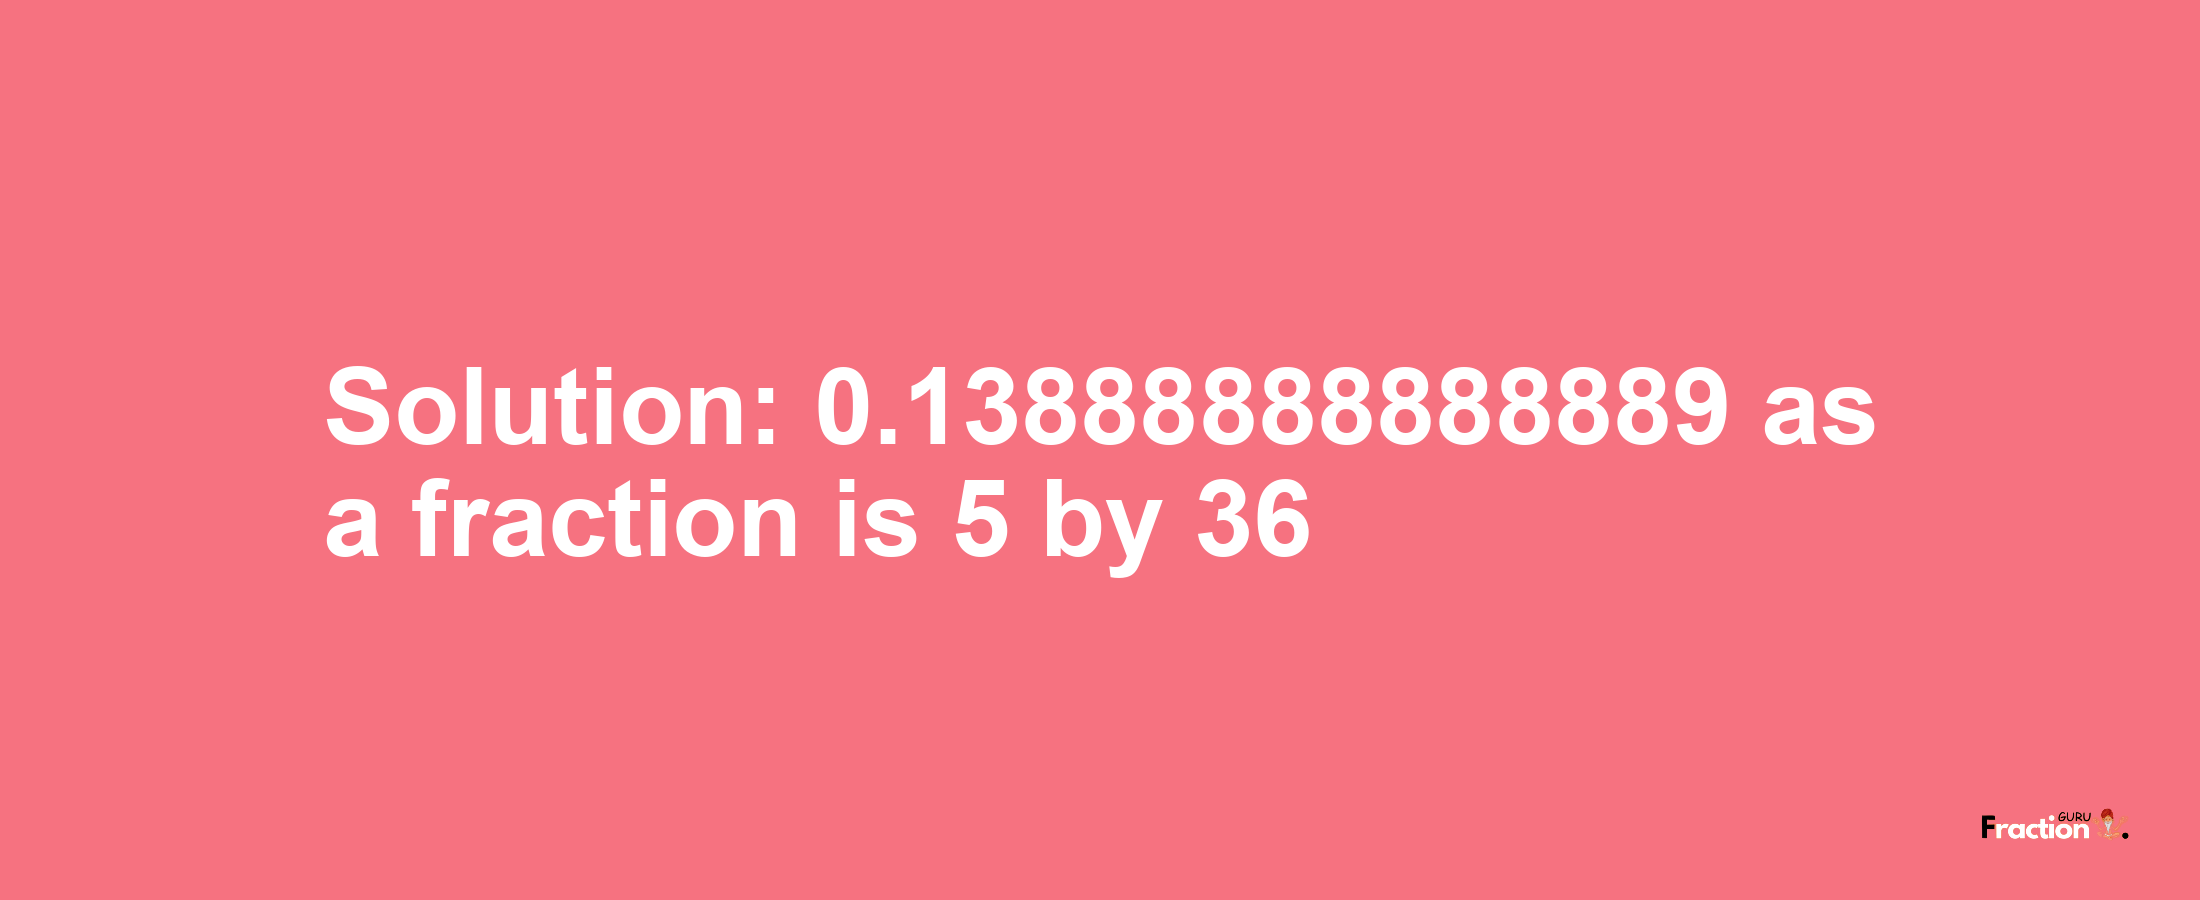 Solution:0.13888888888889 as a fraction is 5/36